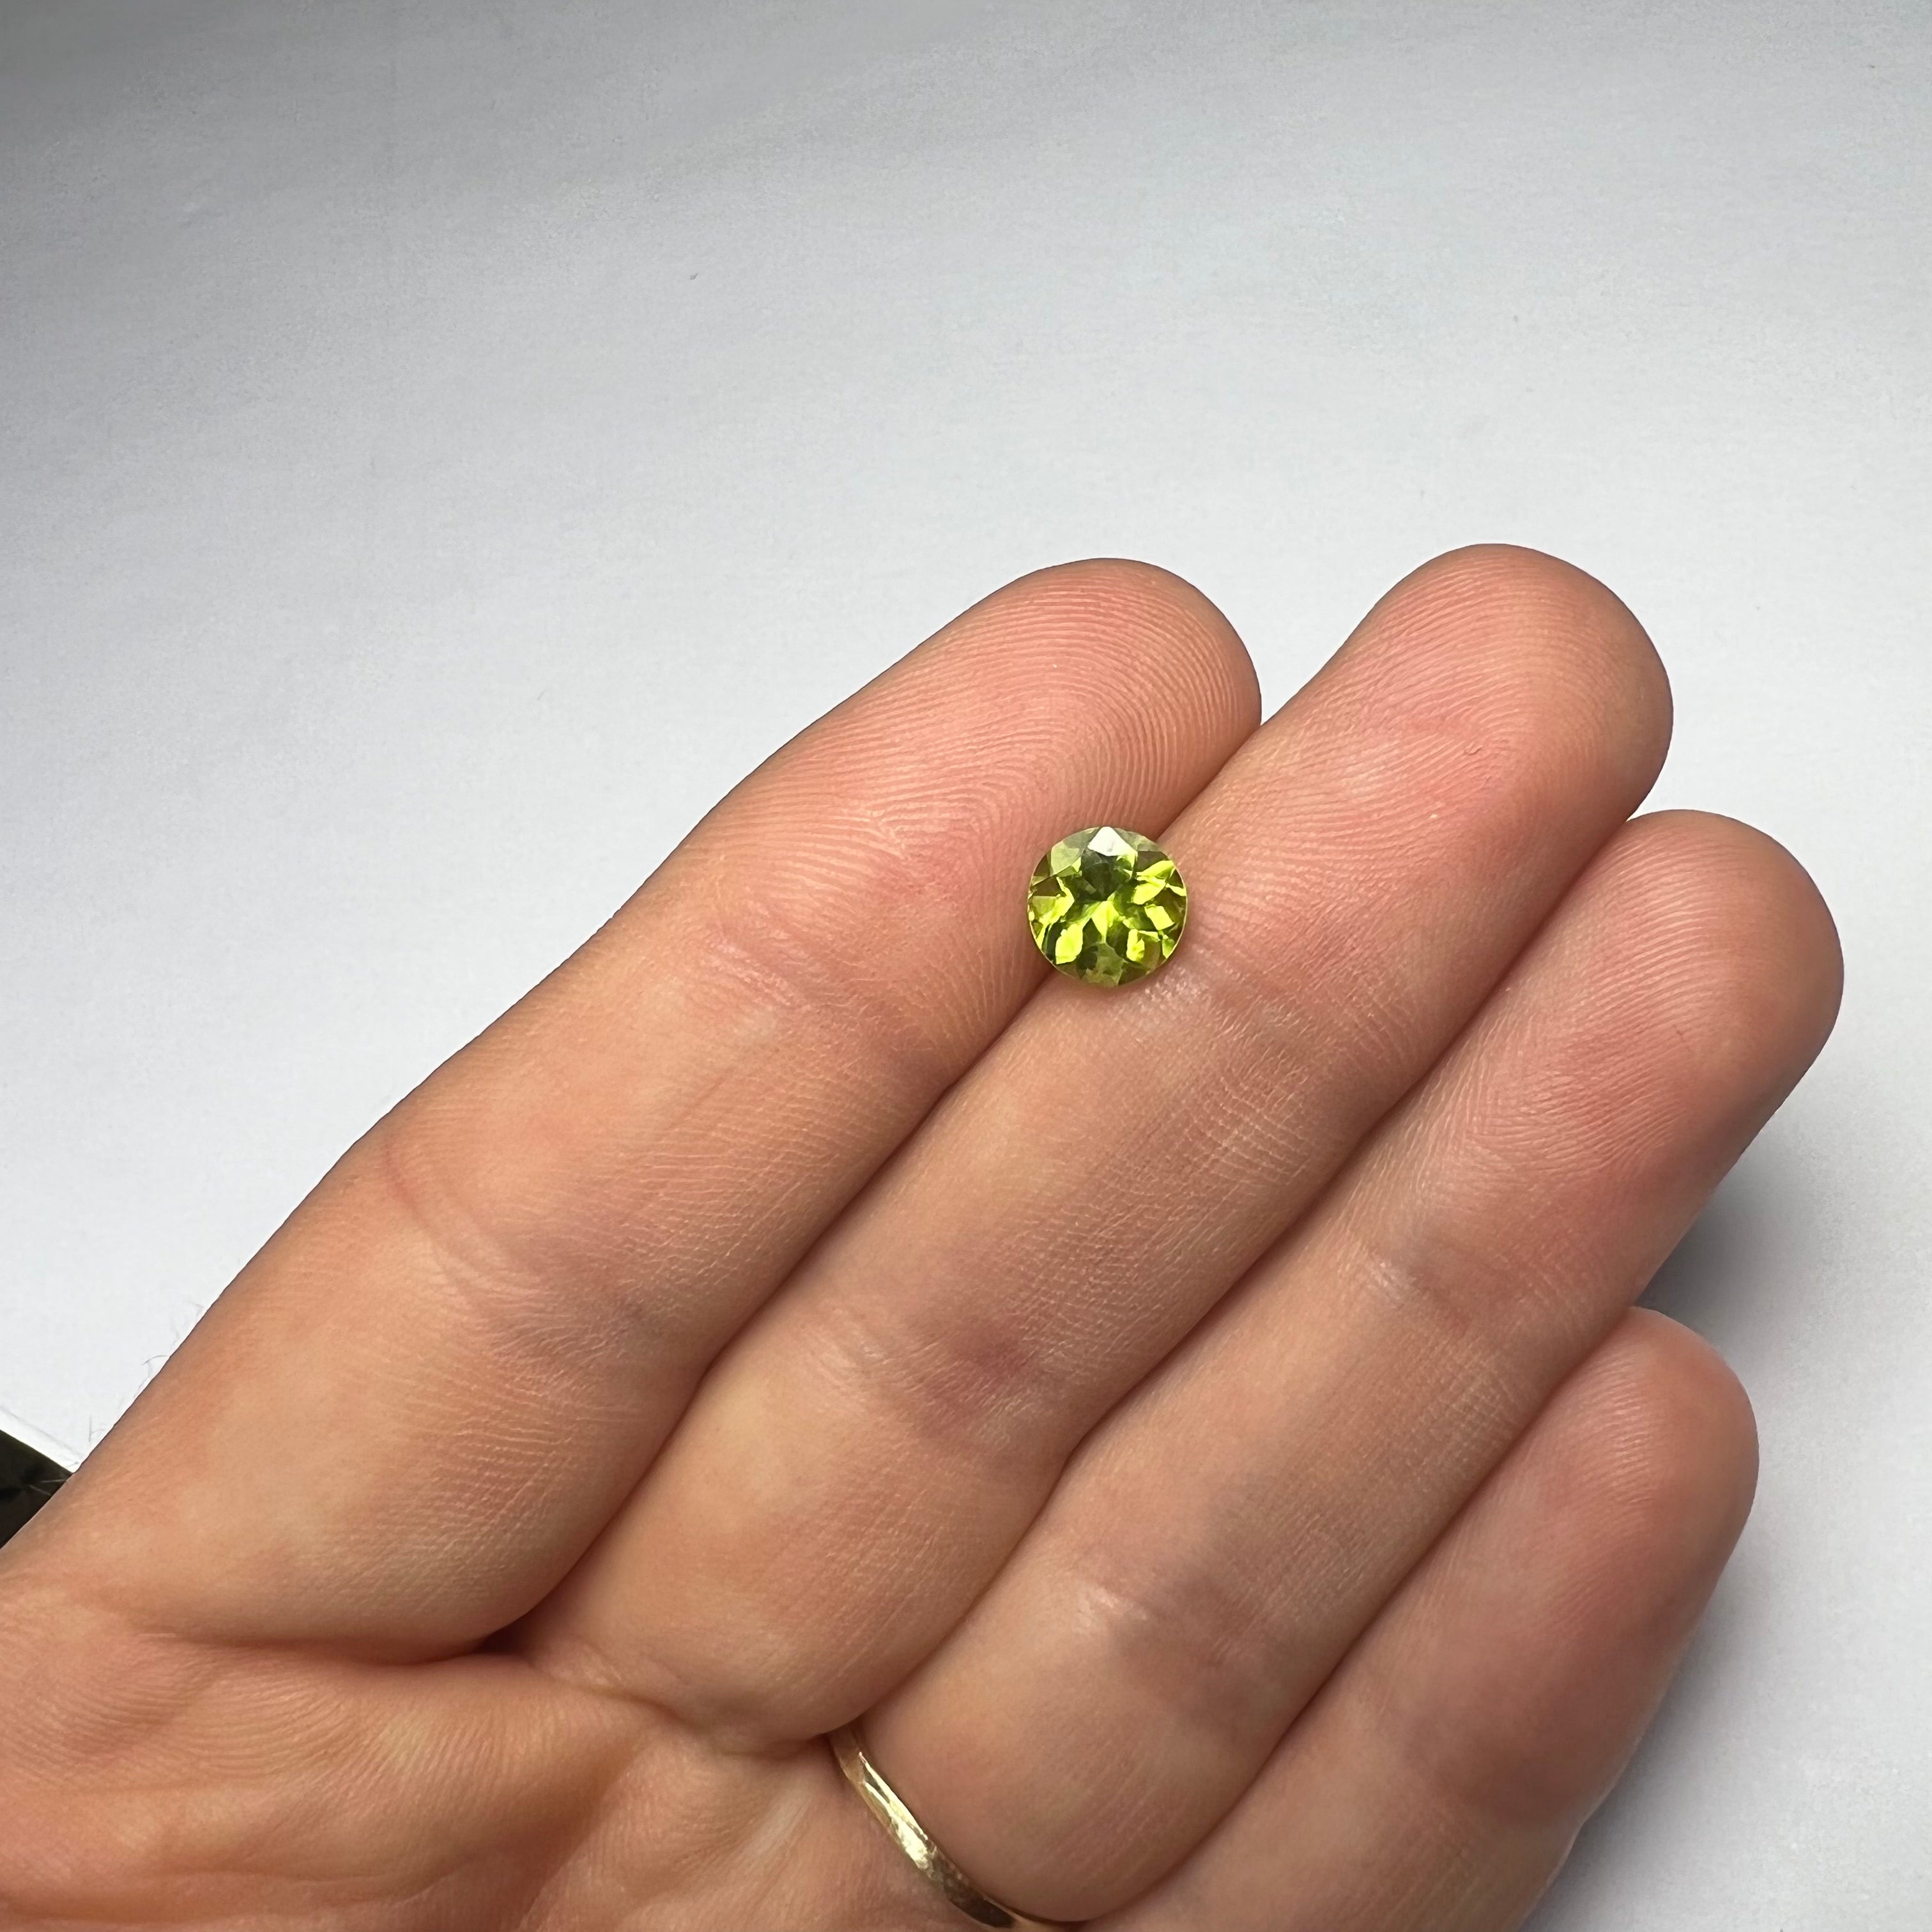 1.34CTW Loose Natural Round Peridot 6.80x4.36mm Earth mined Gemstone